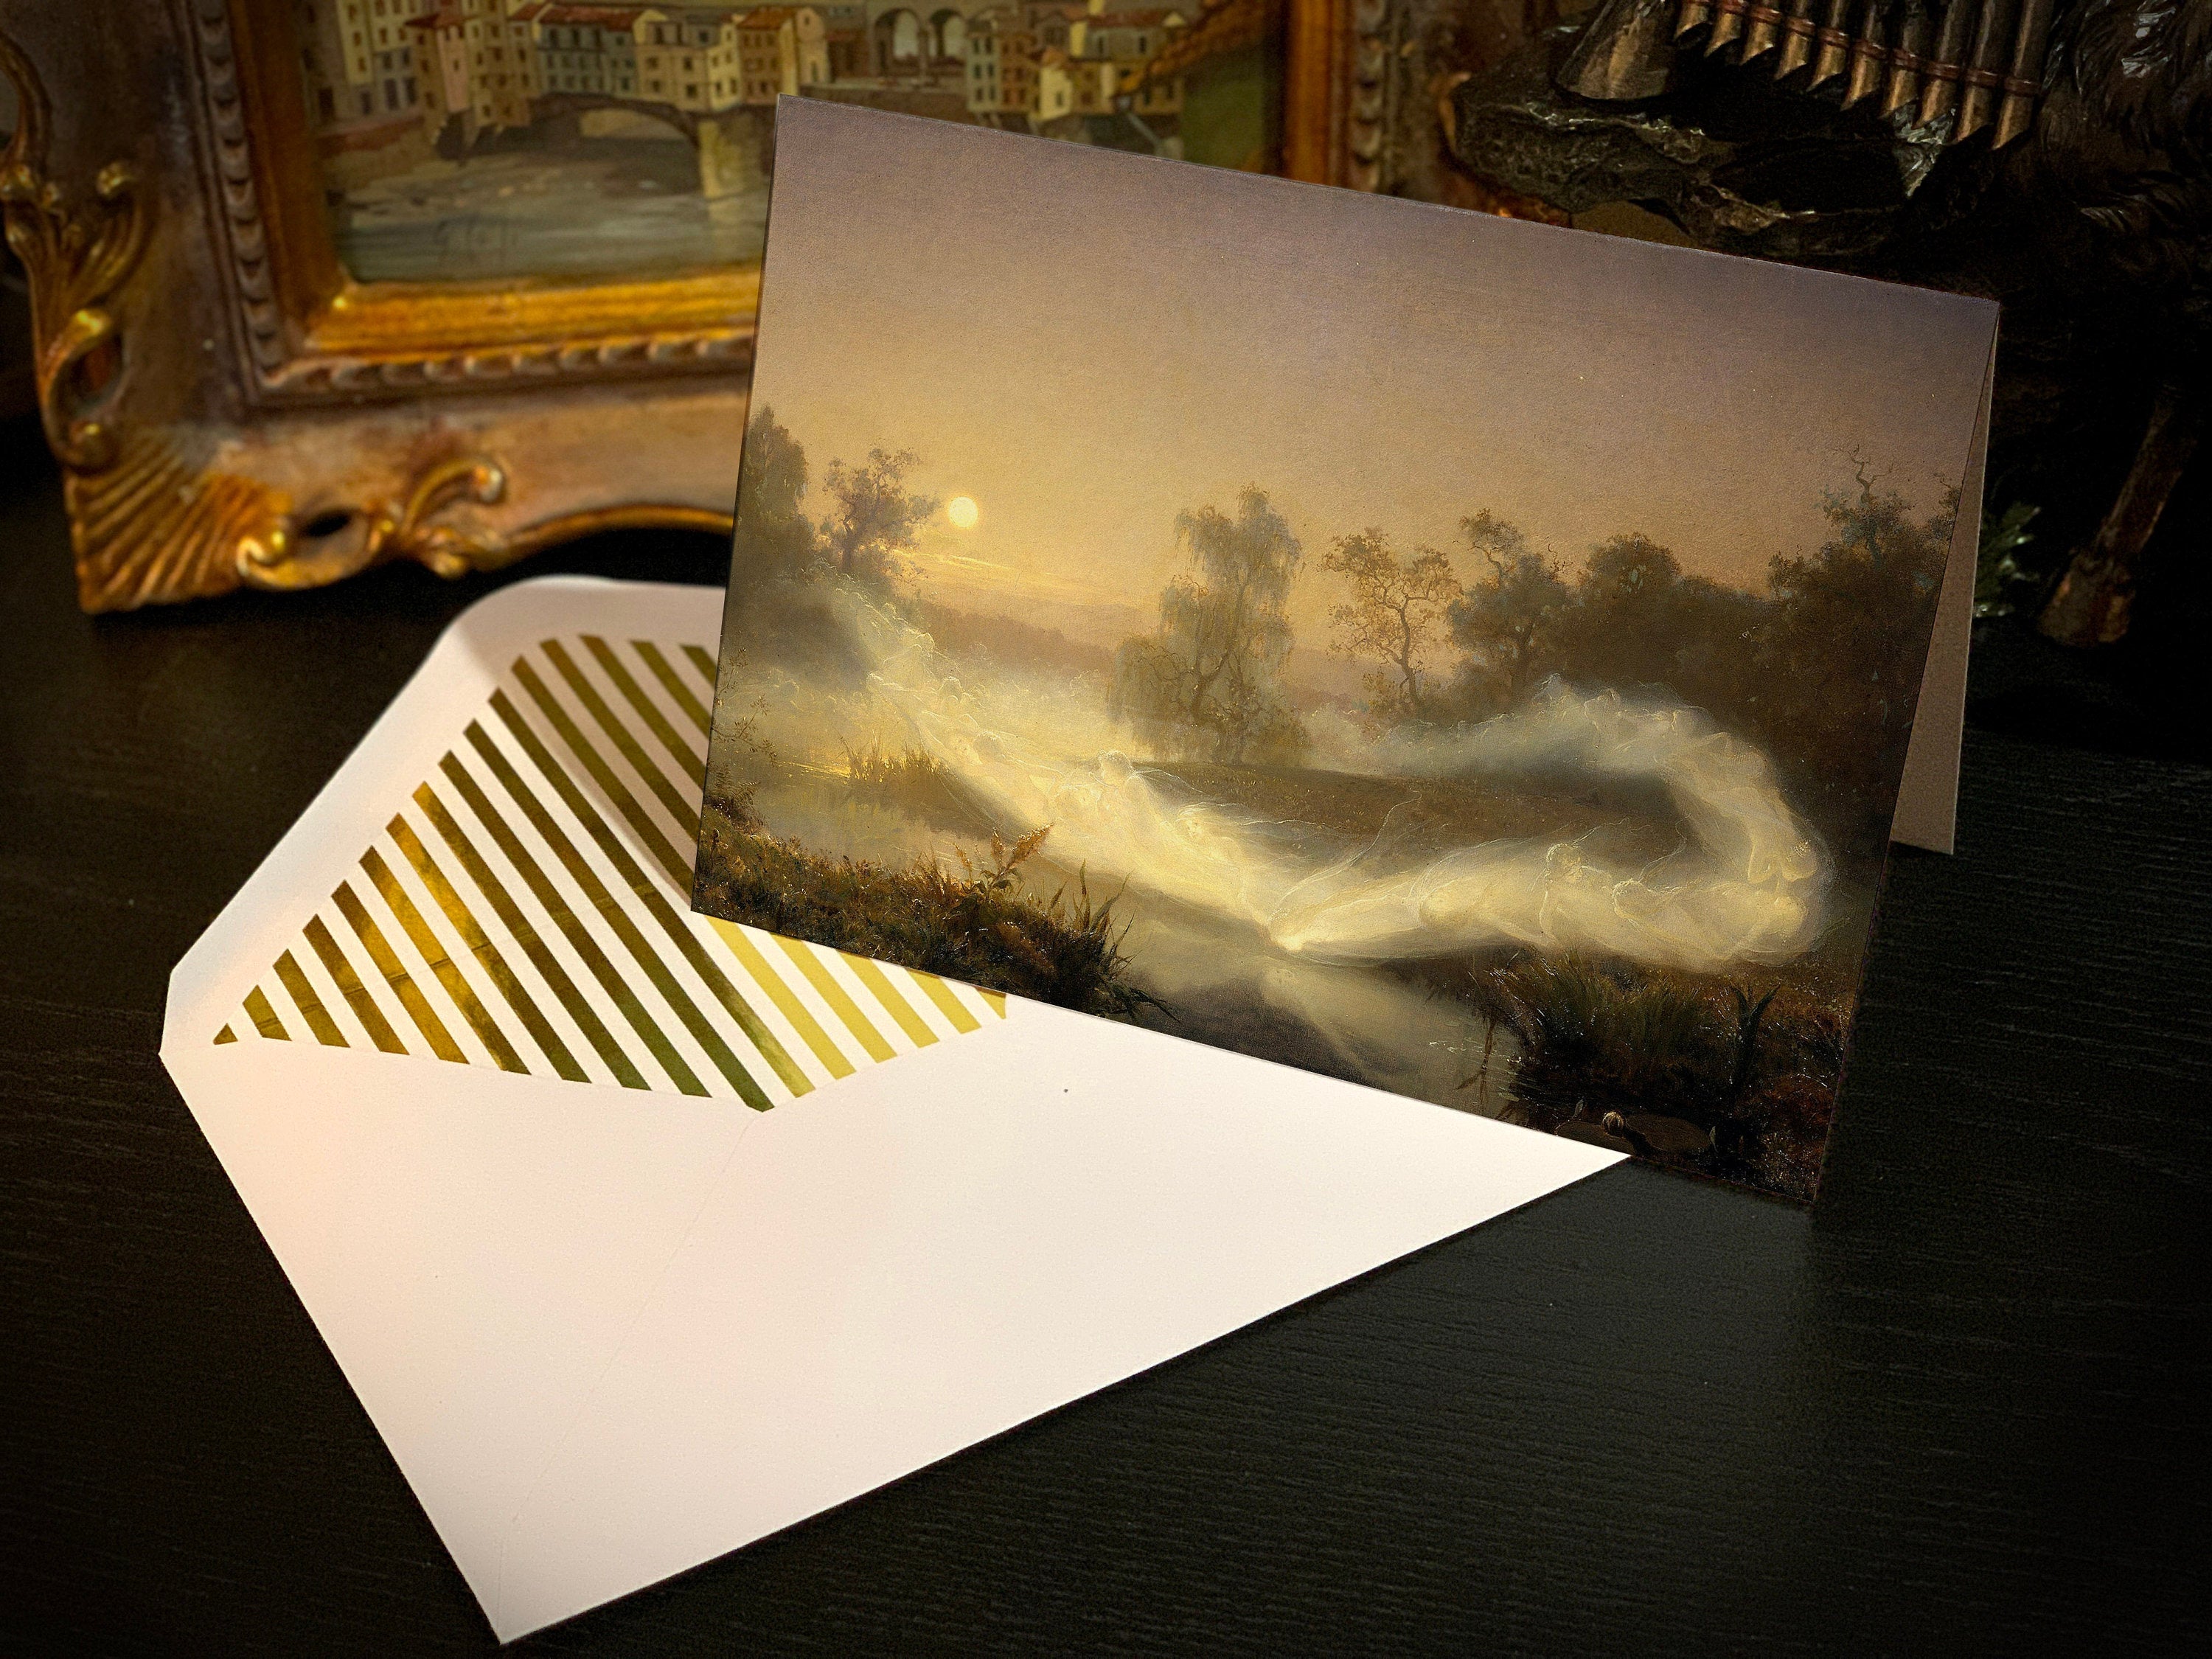 Dancing Fairies by August Malmstrom, Greeting Card with Elegant Striped Gold Foil Envelope, 1 Card/Envelope